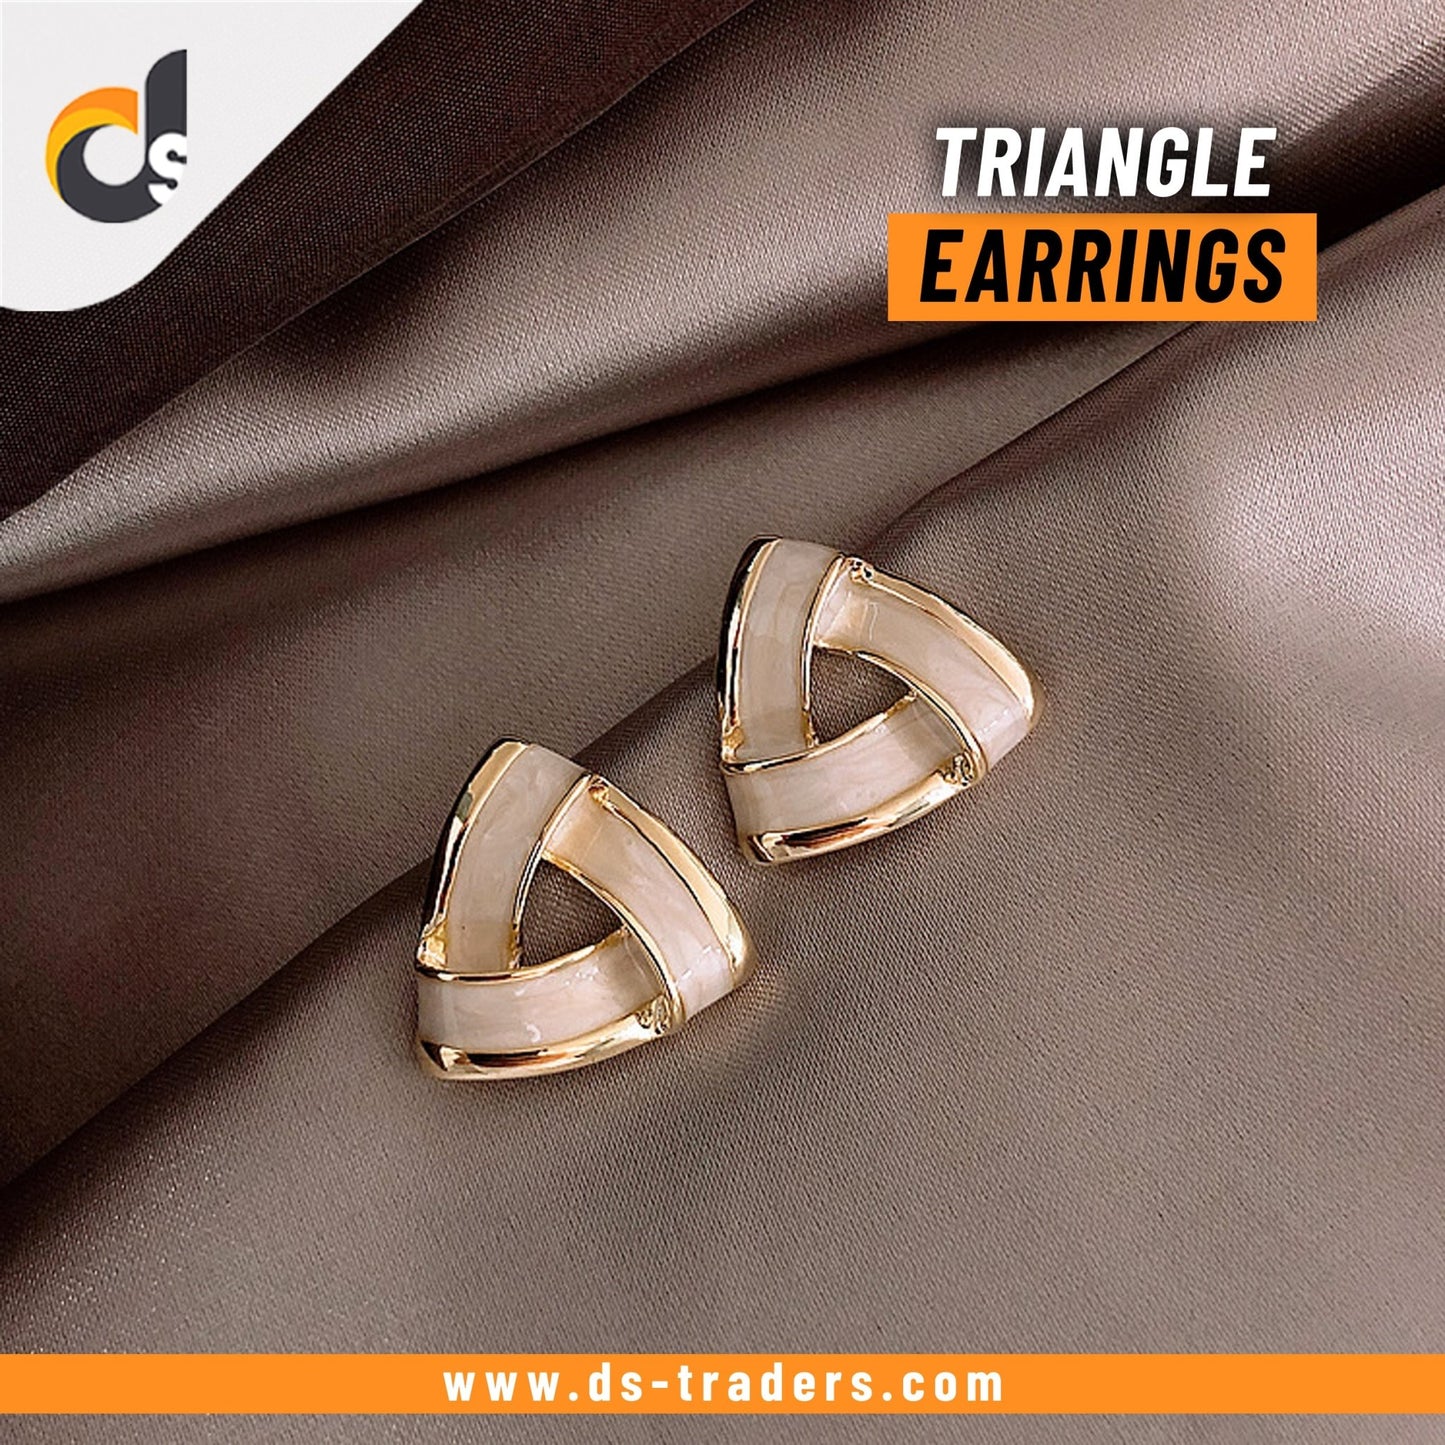 Triangle Earrings - DS Traders